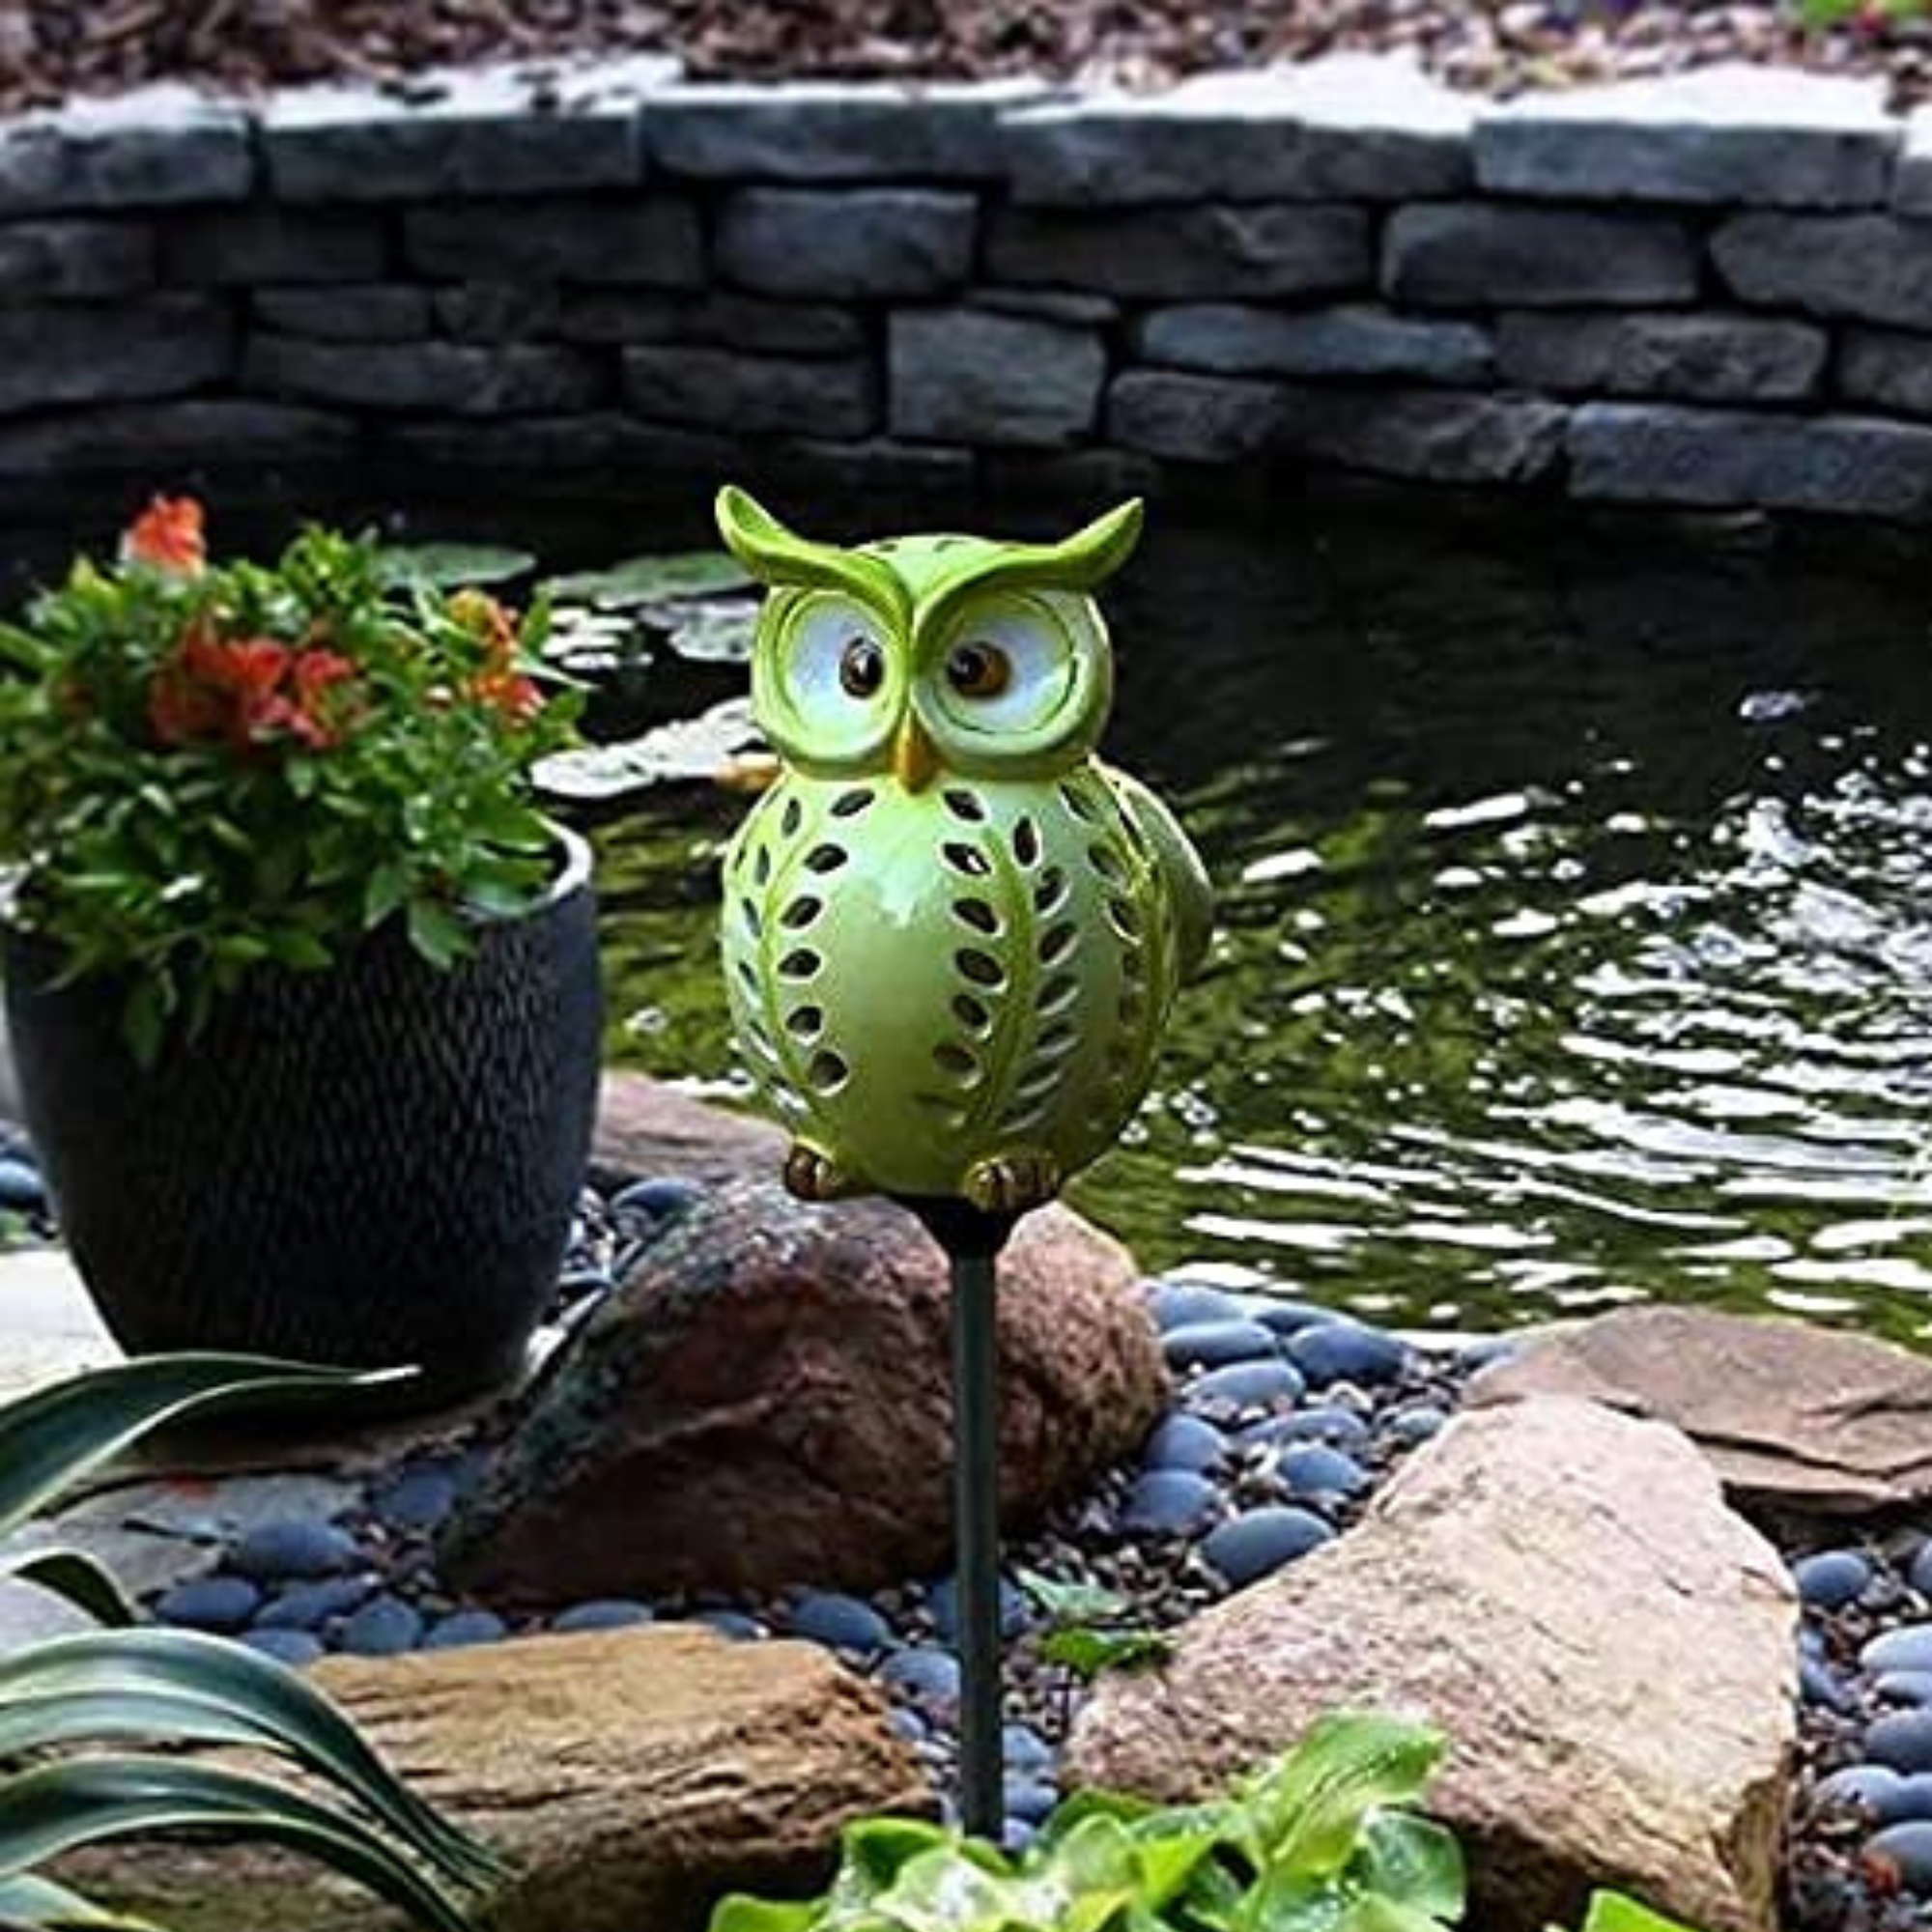 Cute Little Owl Garden Decoration, Best Solar Owl Stake And Solar Owl Light, Ceramic Owl Scarecrow Garden Decor For Your Lawn and Garden - image 4 of 8